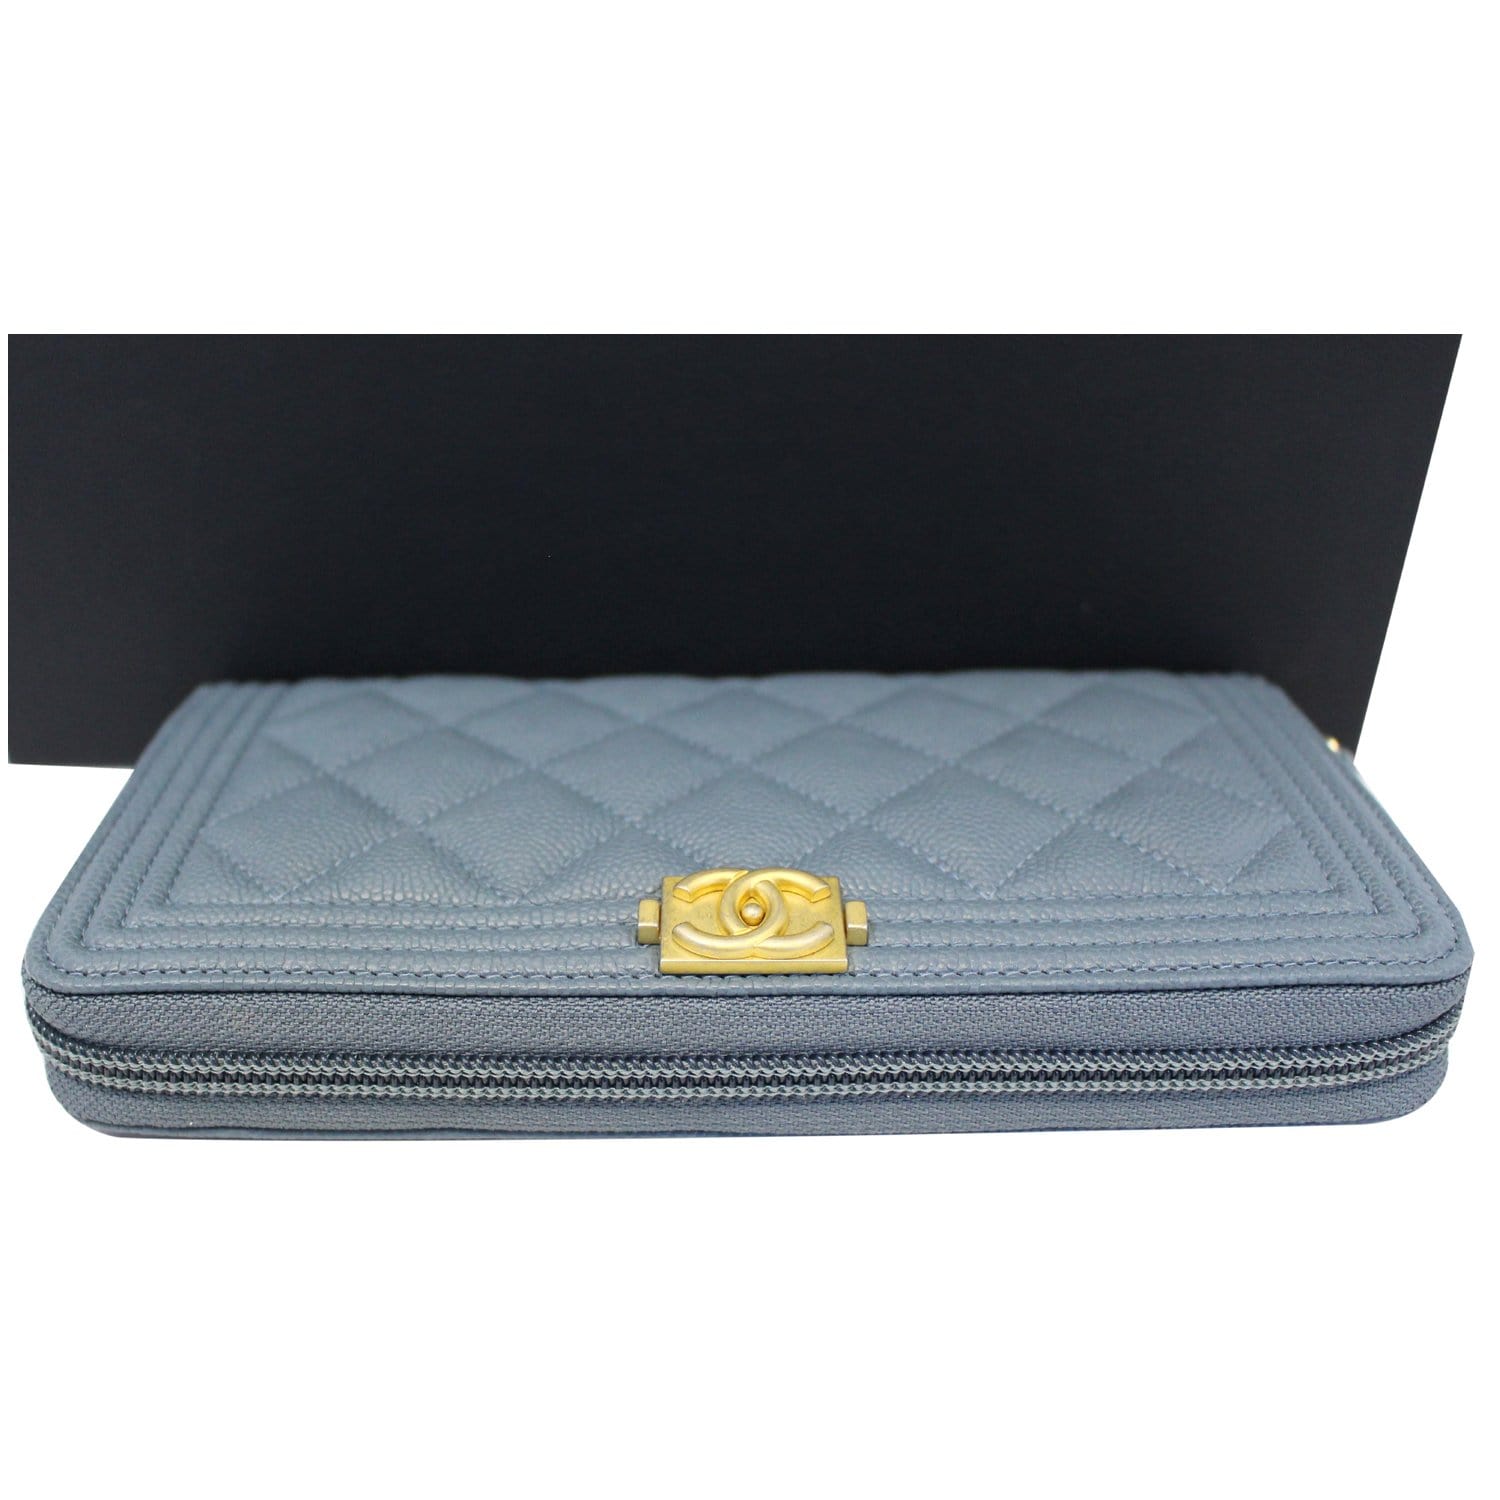 CHANEL Small Boy Long Caviar Leather Zip Around Wallet Blue-US